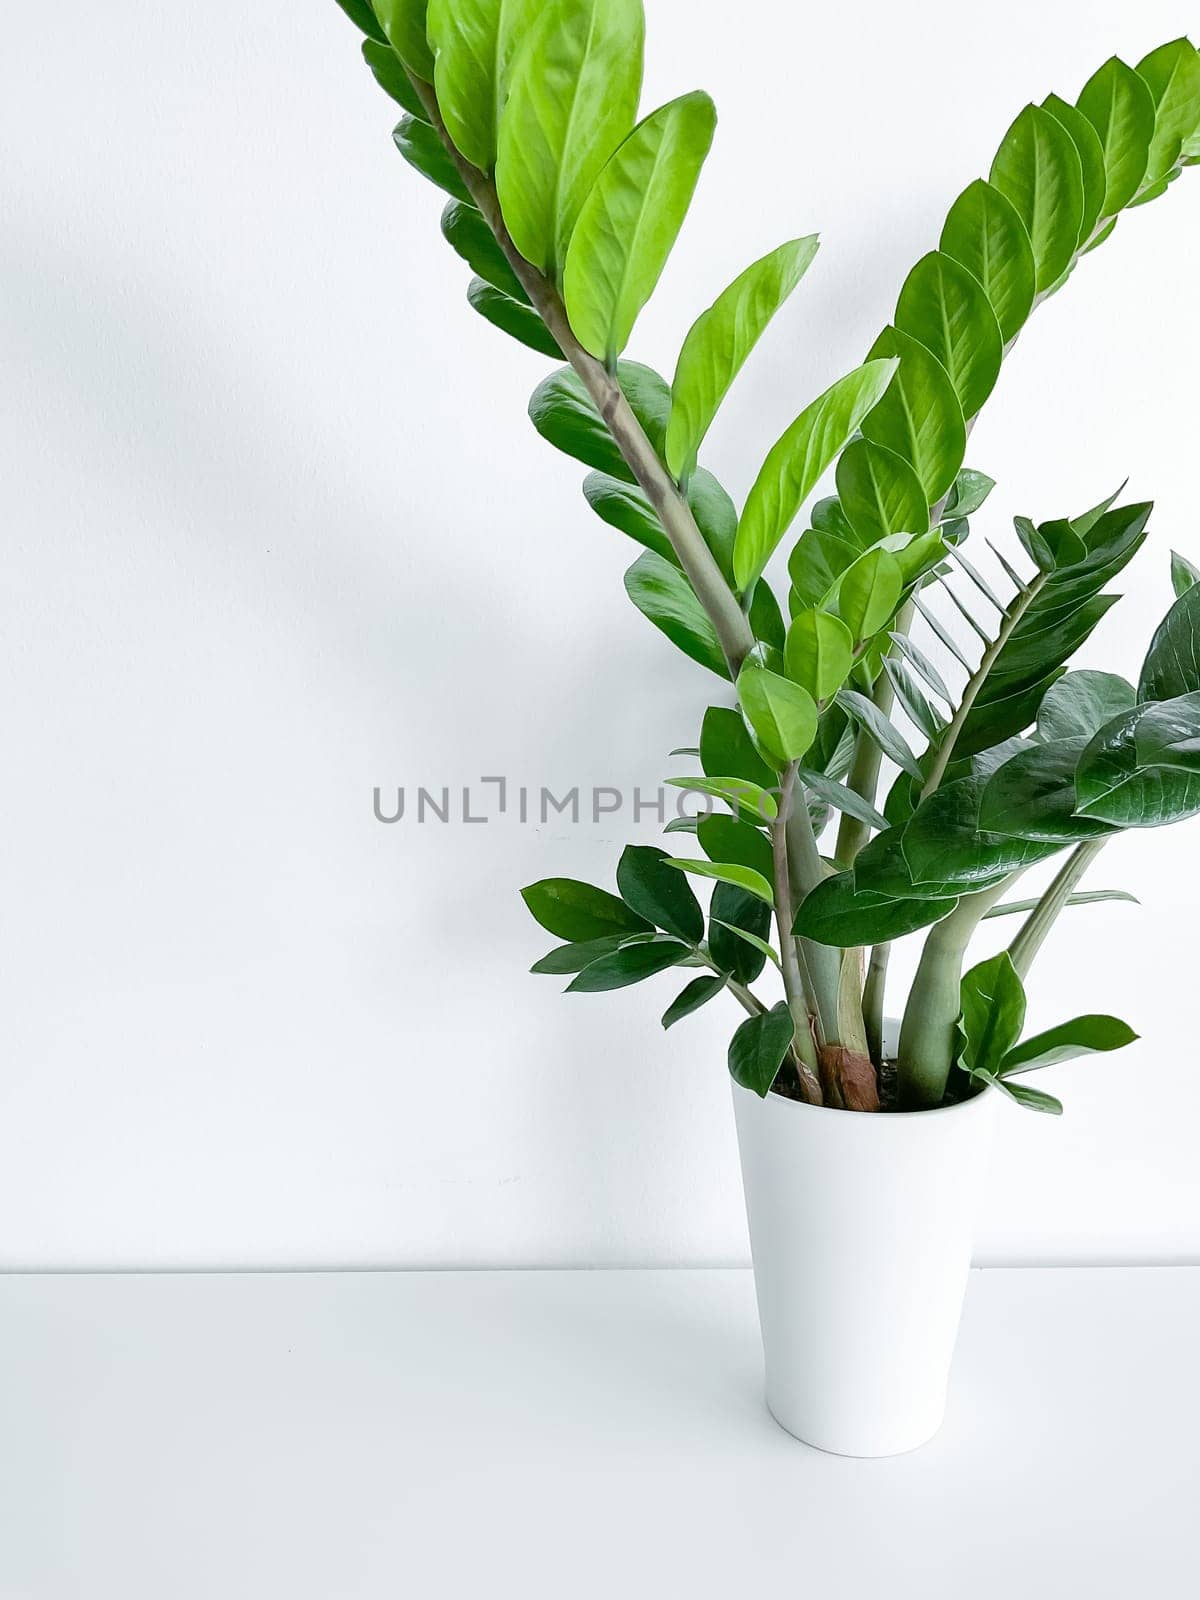 Zamioculcas Zamiifolia in a white pot isolated on a white background with space for text copyright and a crystal peeking out of the pot.